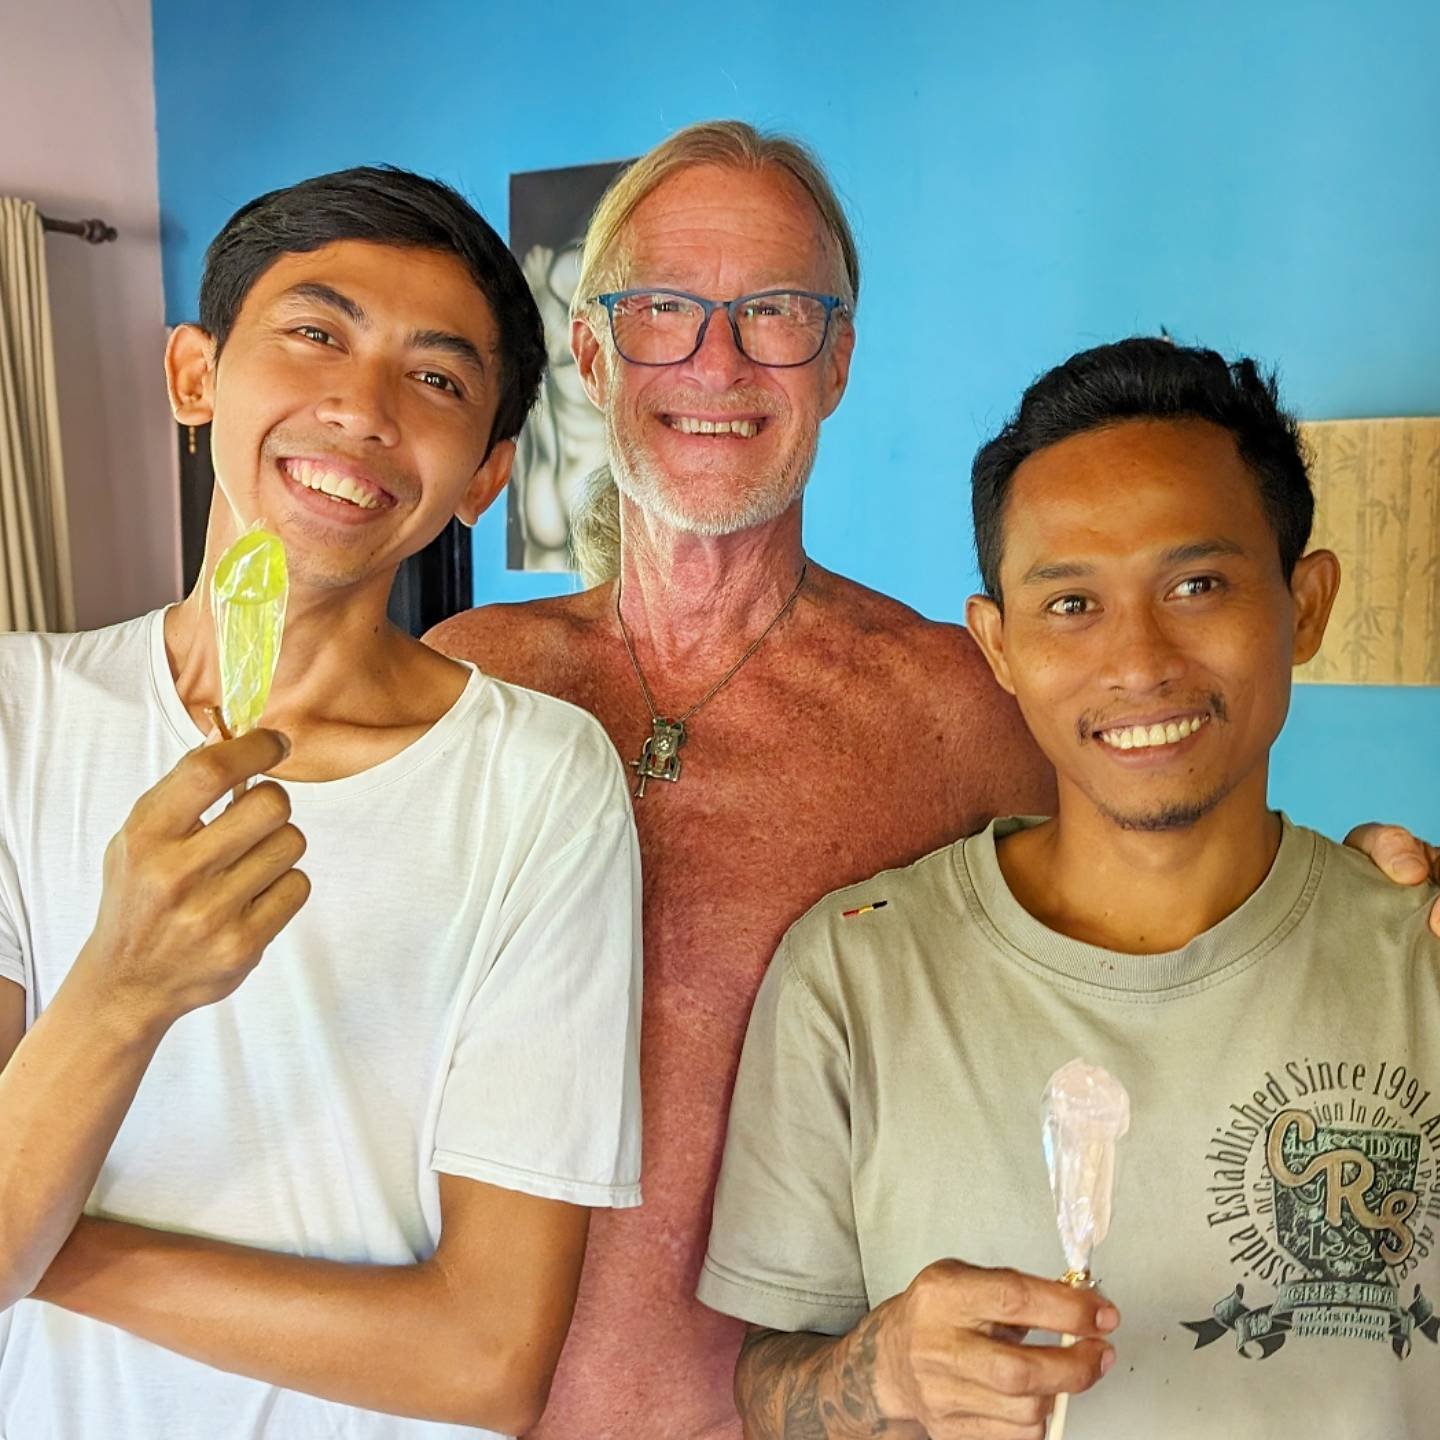 Rich finally shared his &quot;7 Pack of Penis Suckers&quot; with our great housekeepers, the manager and four other beautiful naturist friends at Bali au Naturel is the perfect place to share them!❤️🍆🍆❤️
If you've been following us closely, you kne